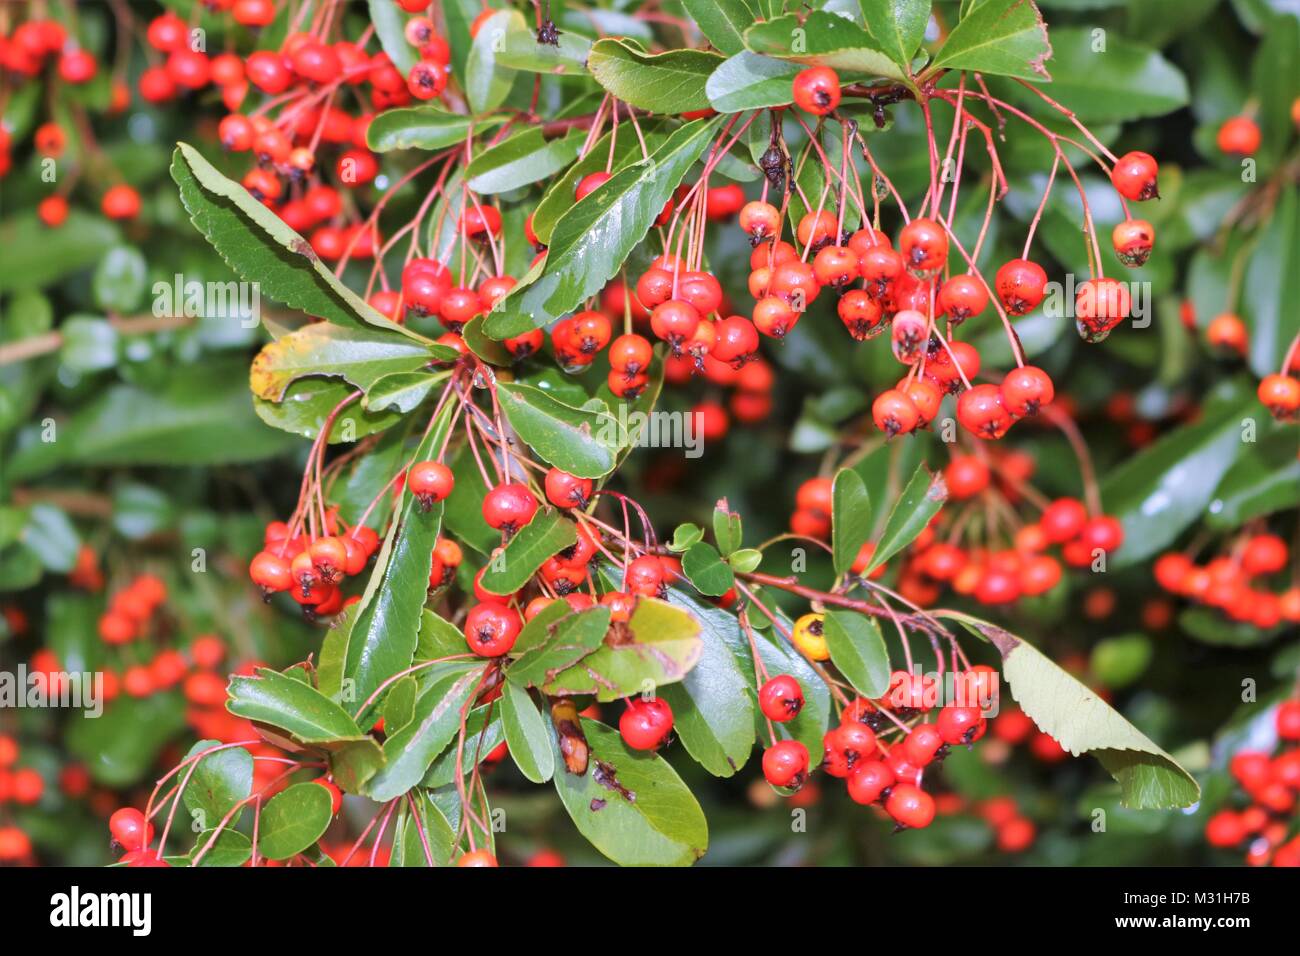 Skimmia japonica Reevesiana in Berry, Red berries and green leaves in Autumn Stock Photo